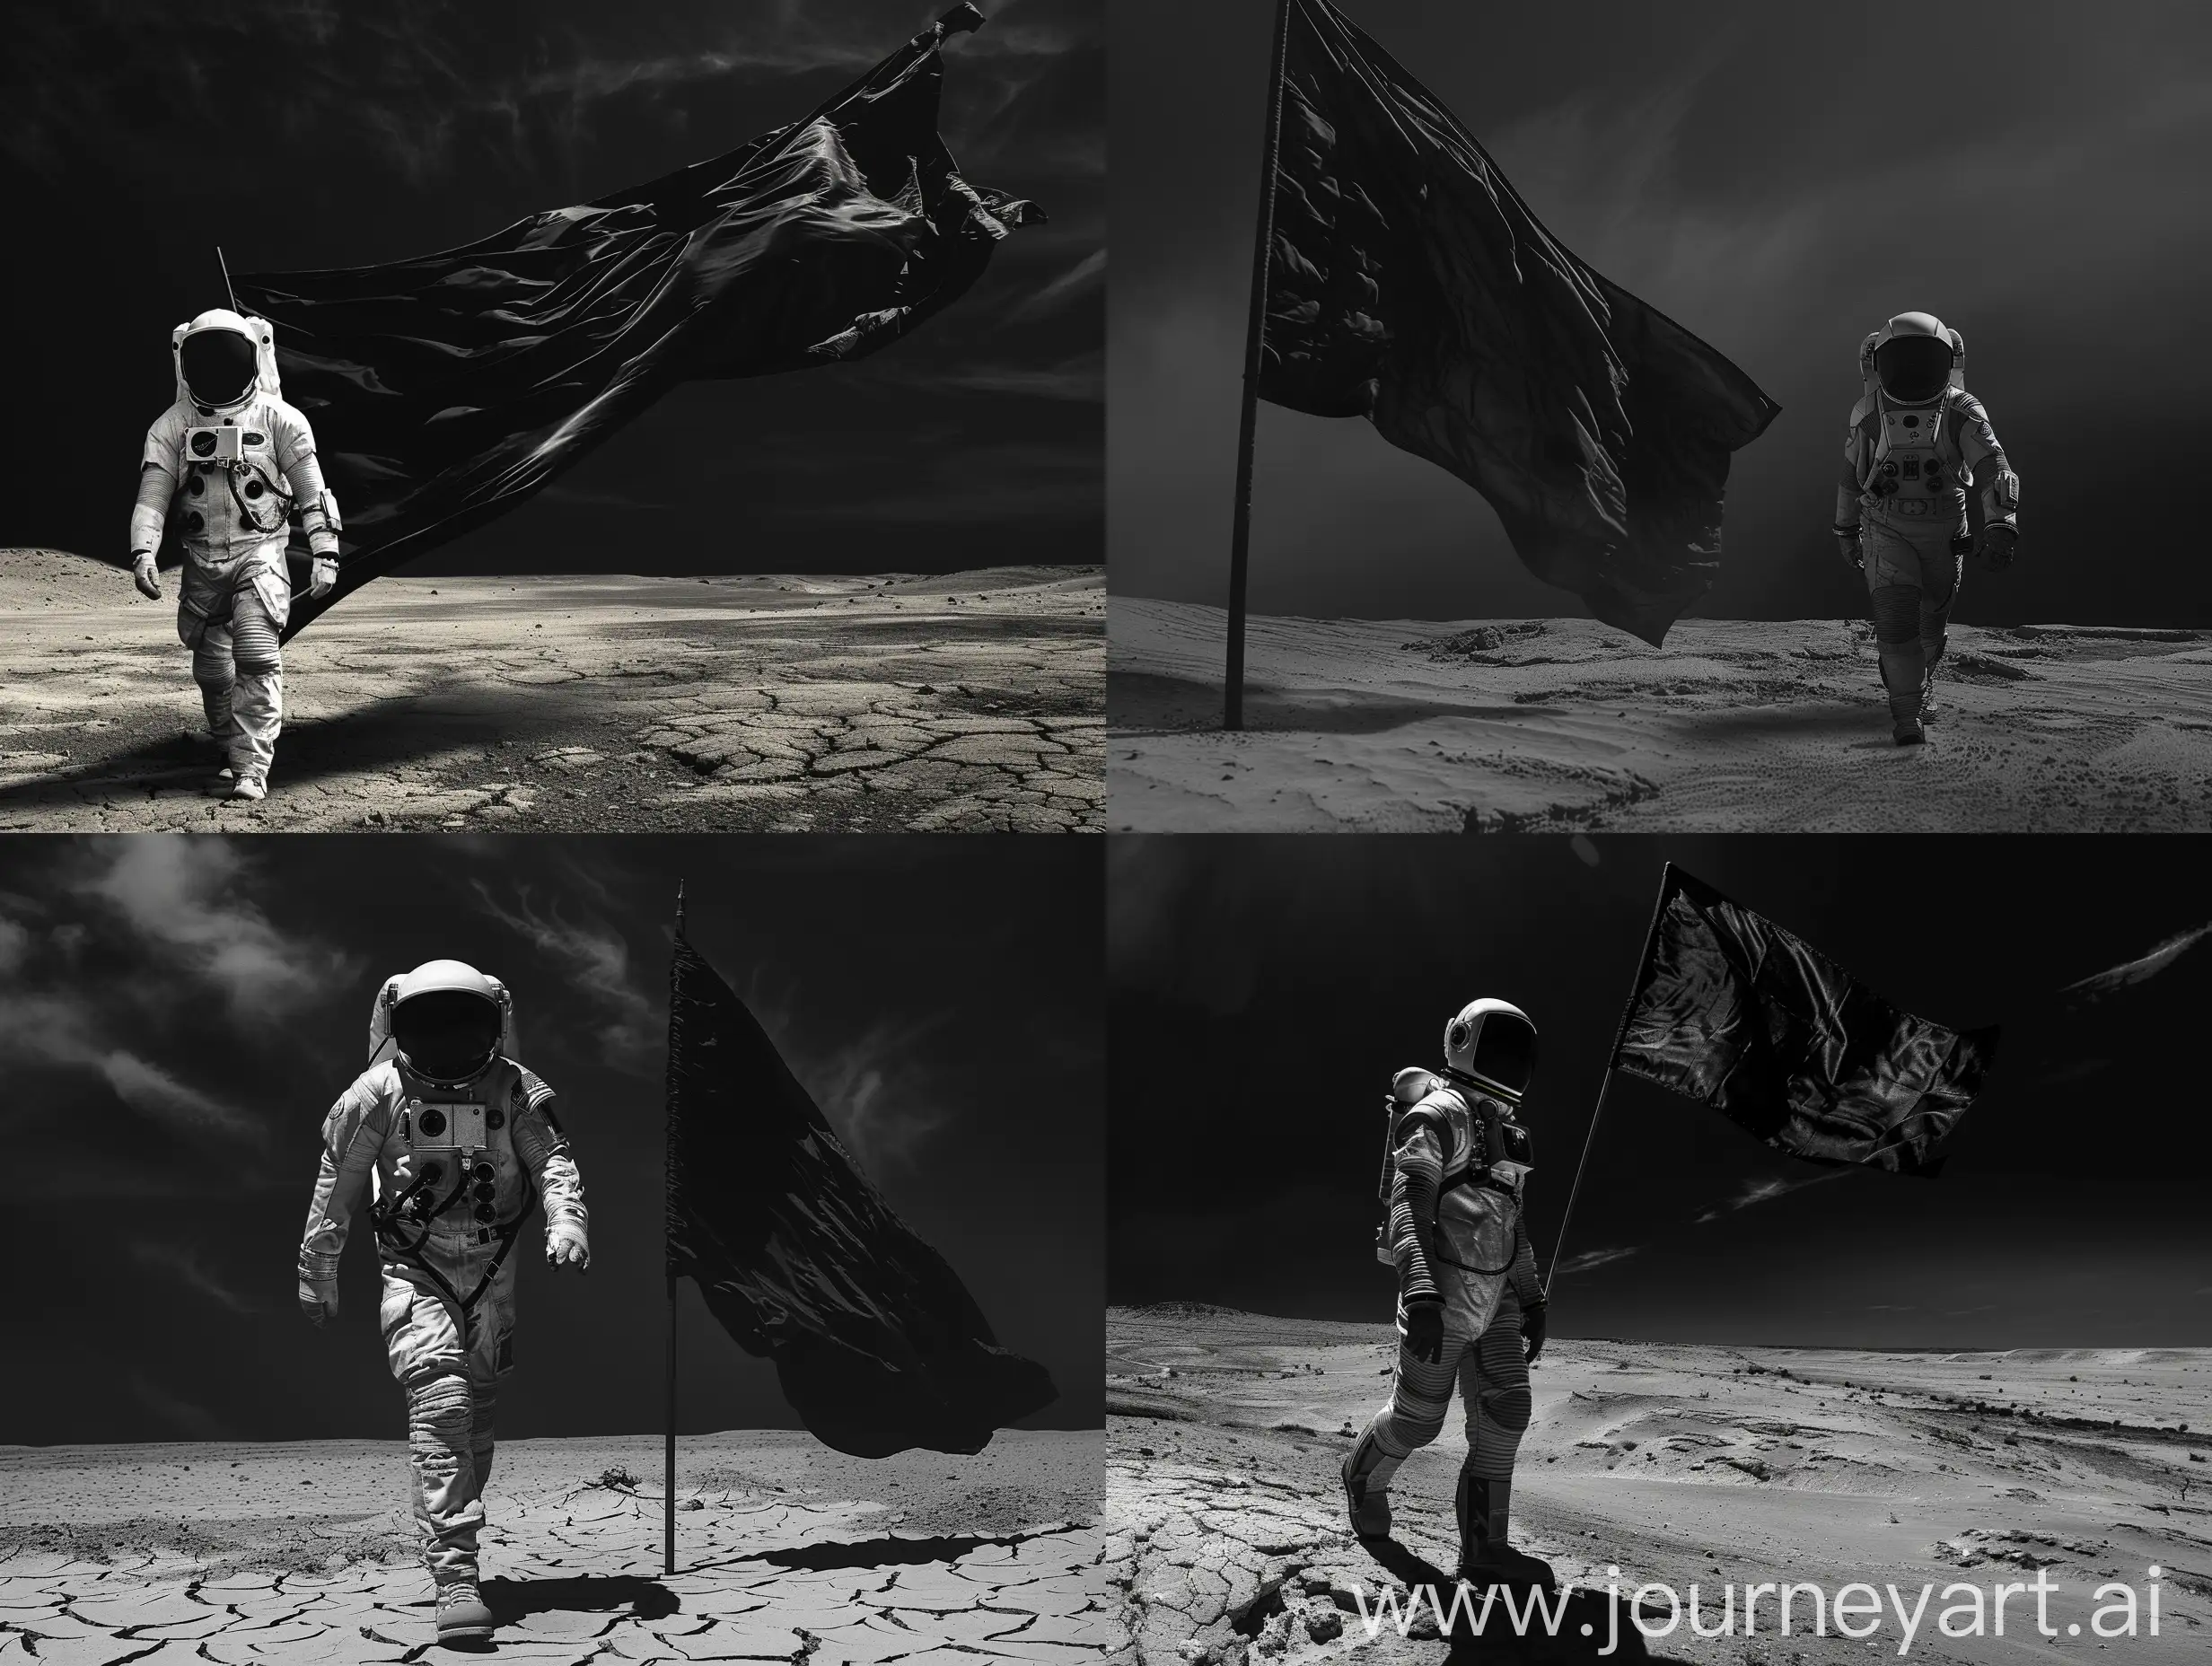 Solitary-Astronaut-with-Black-Flag-on-Barren-Landscape